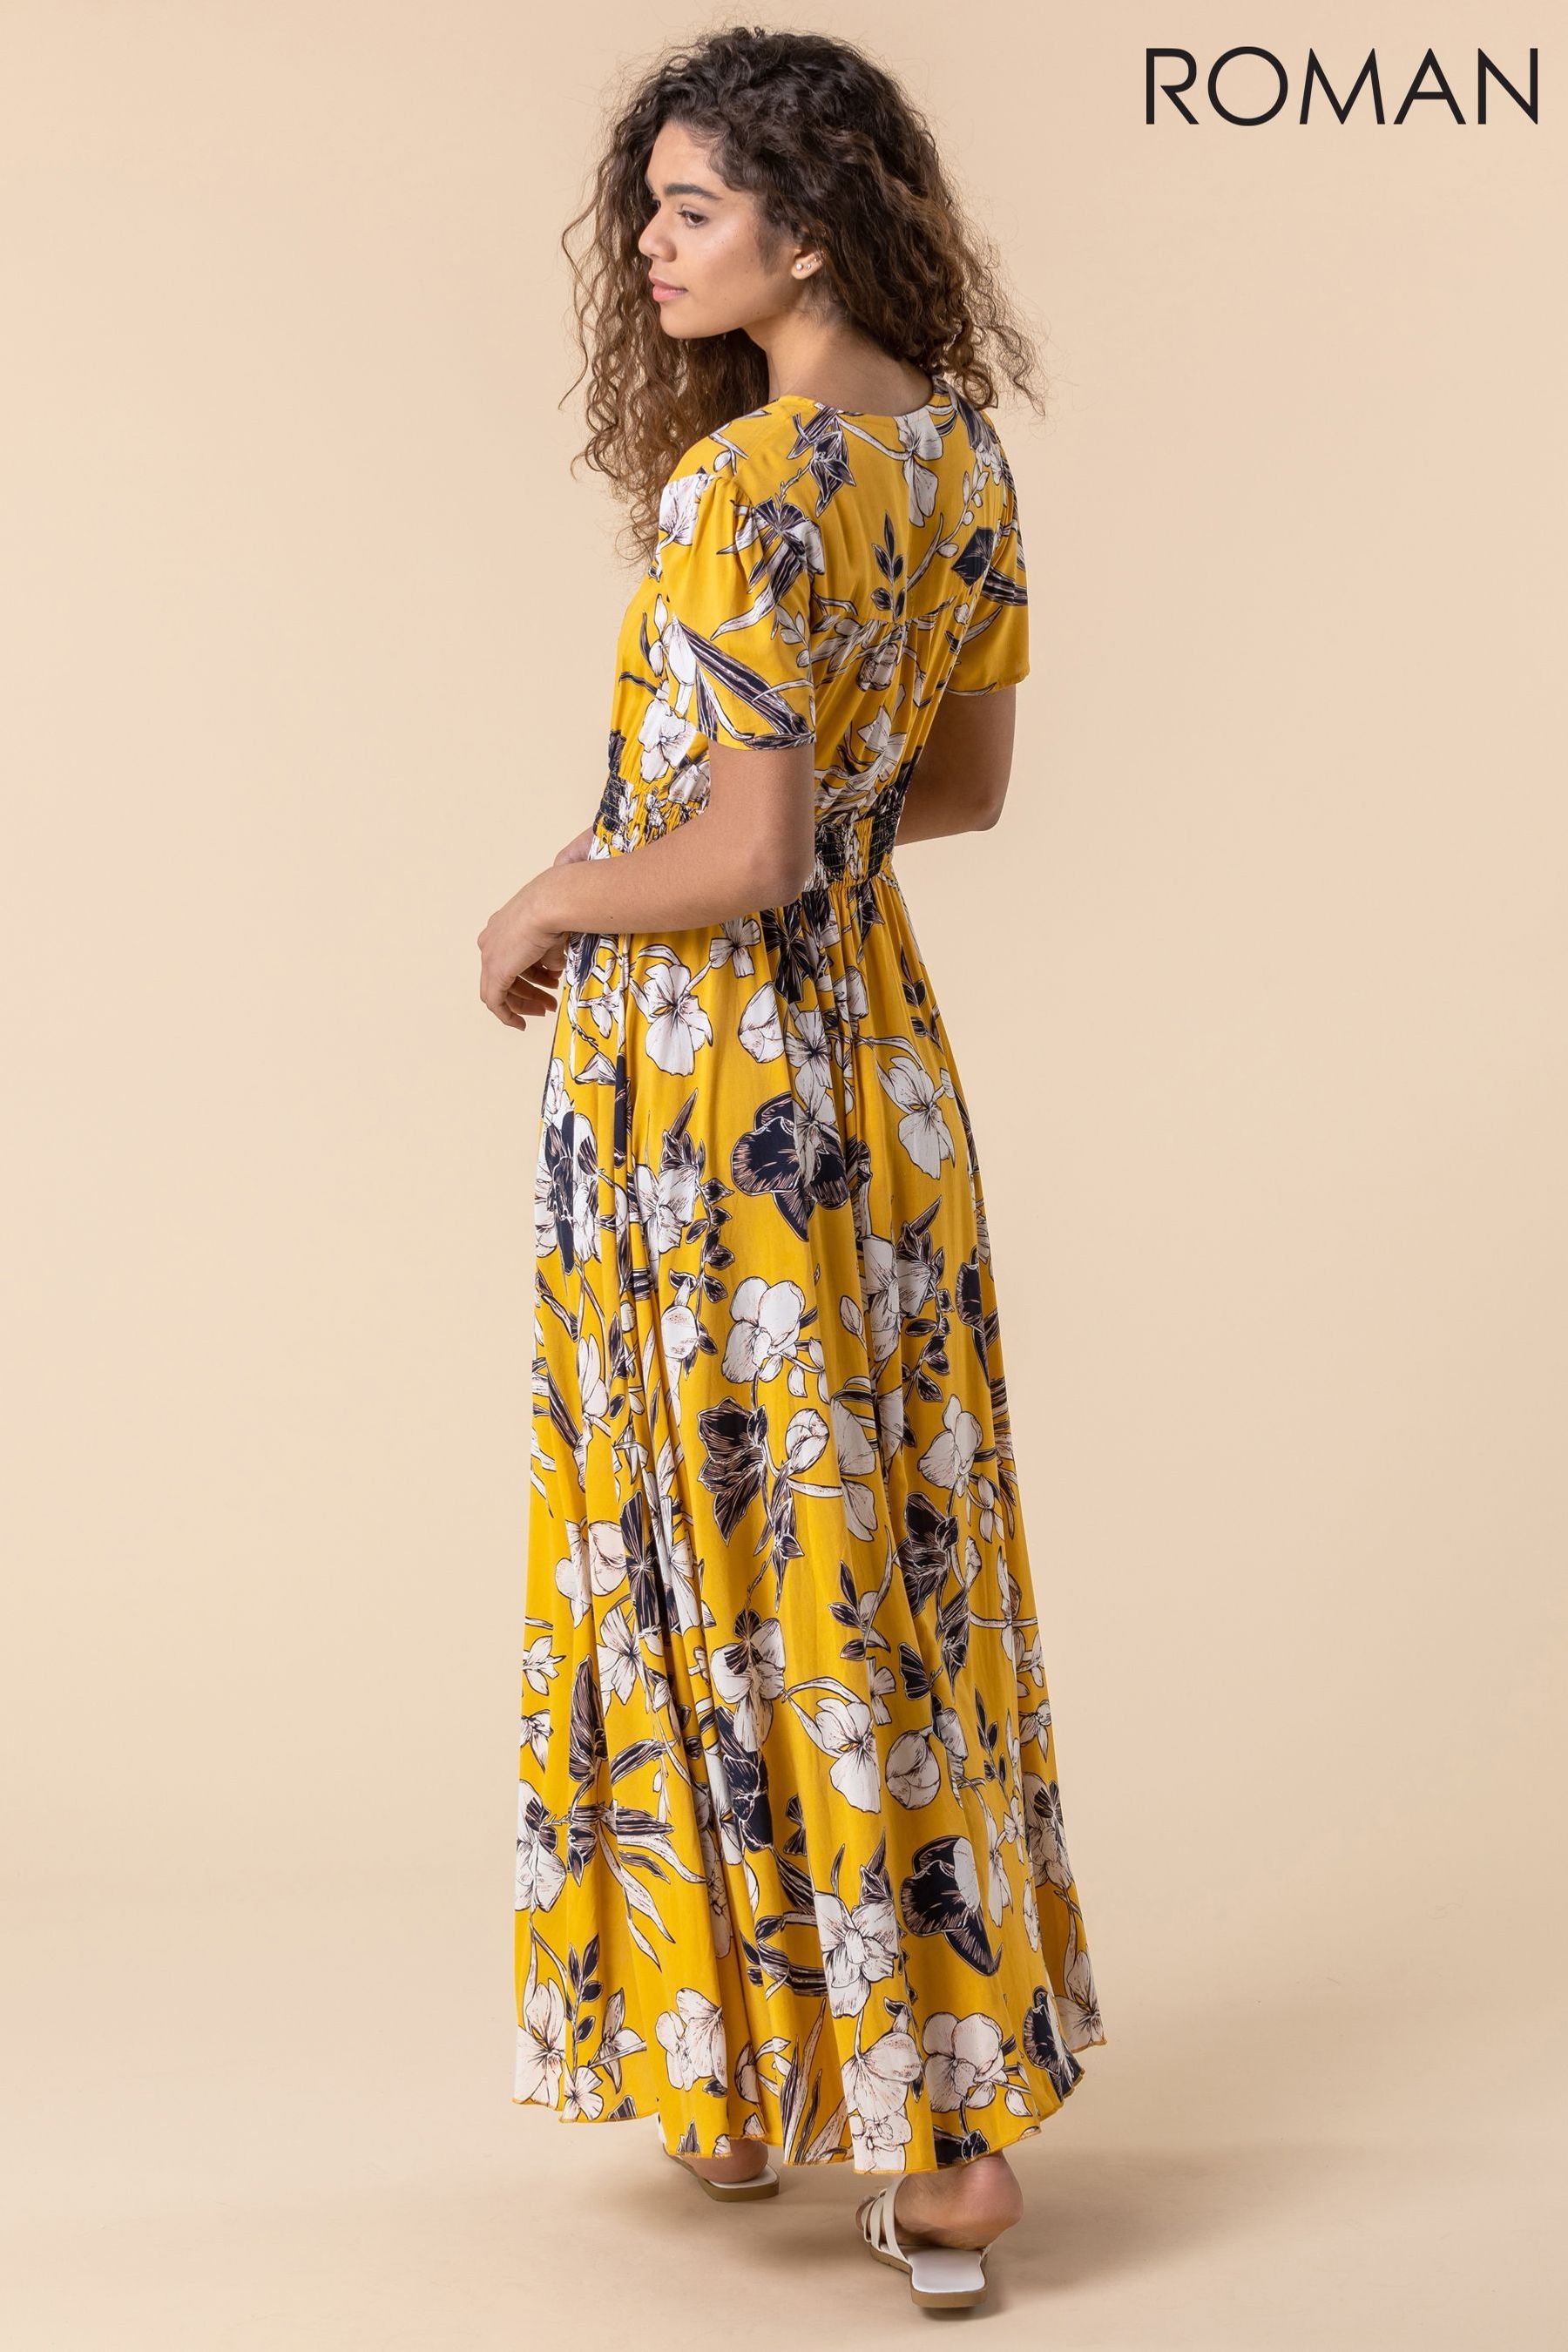 Buy Roman Yellow Floral Print Shirred Waist Maxi Dress from the Next UK ...